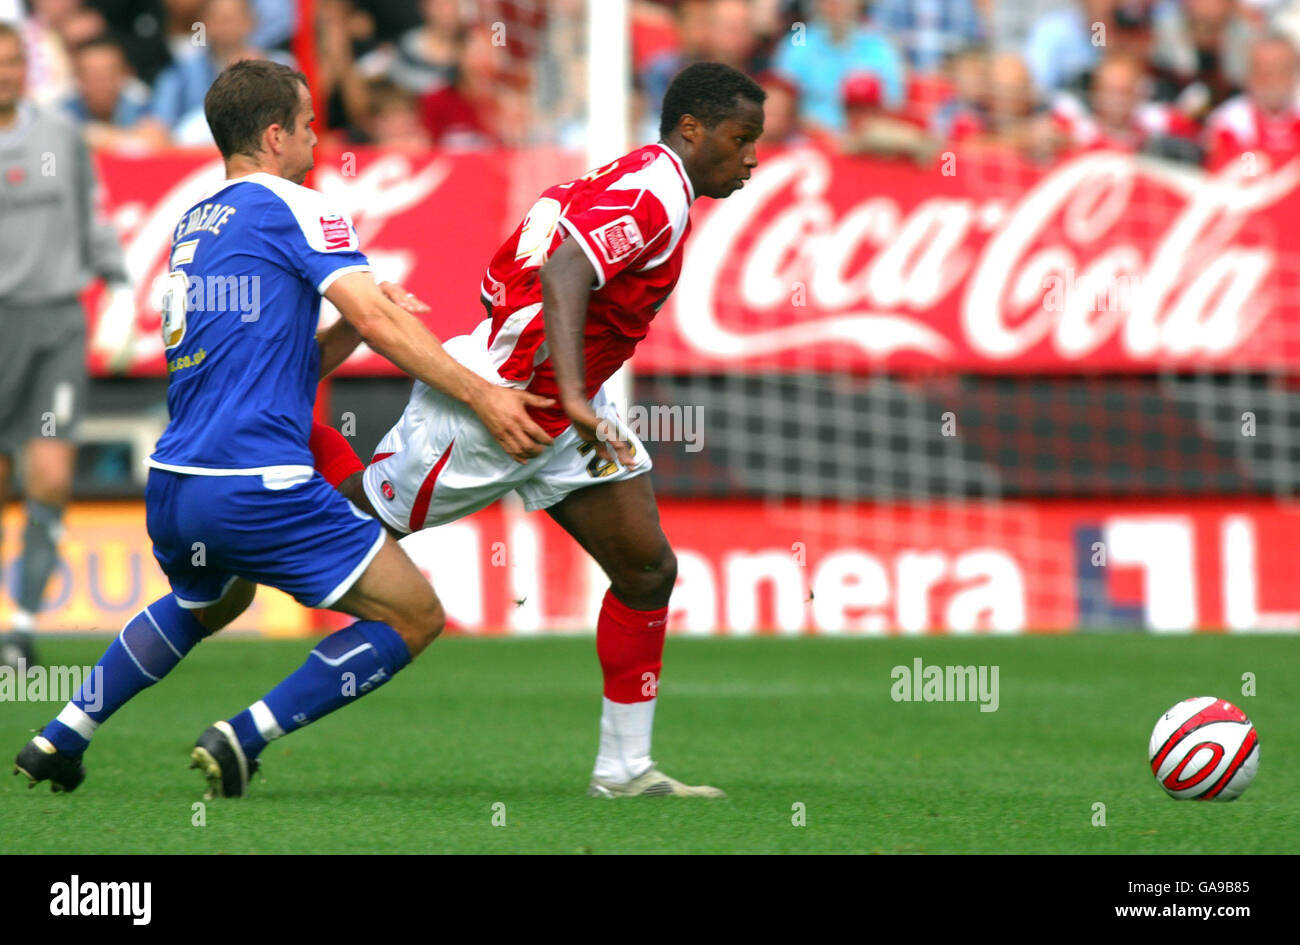 Charlton Athletic's Jose Semedo (right) and Leicester City's Stephen Clemence battle for the ball during the Coca-Cola Football Championship match at The Valley, London. Stock Photo